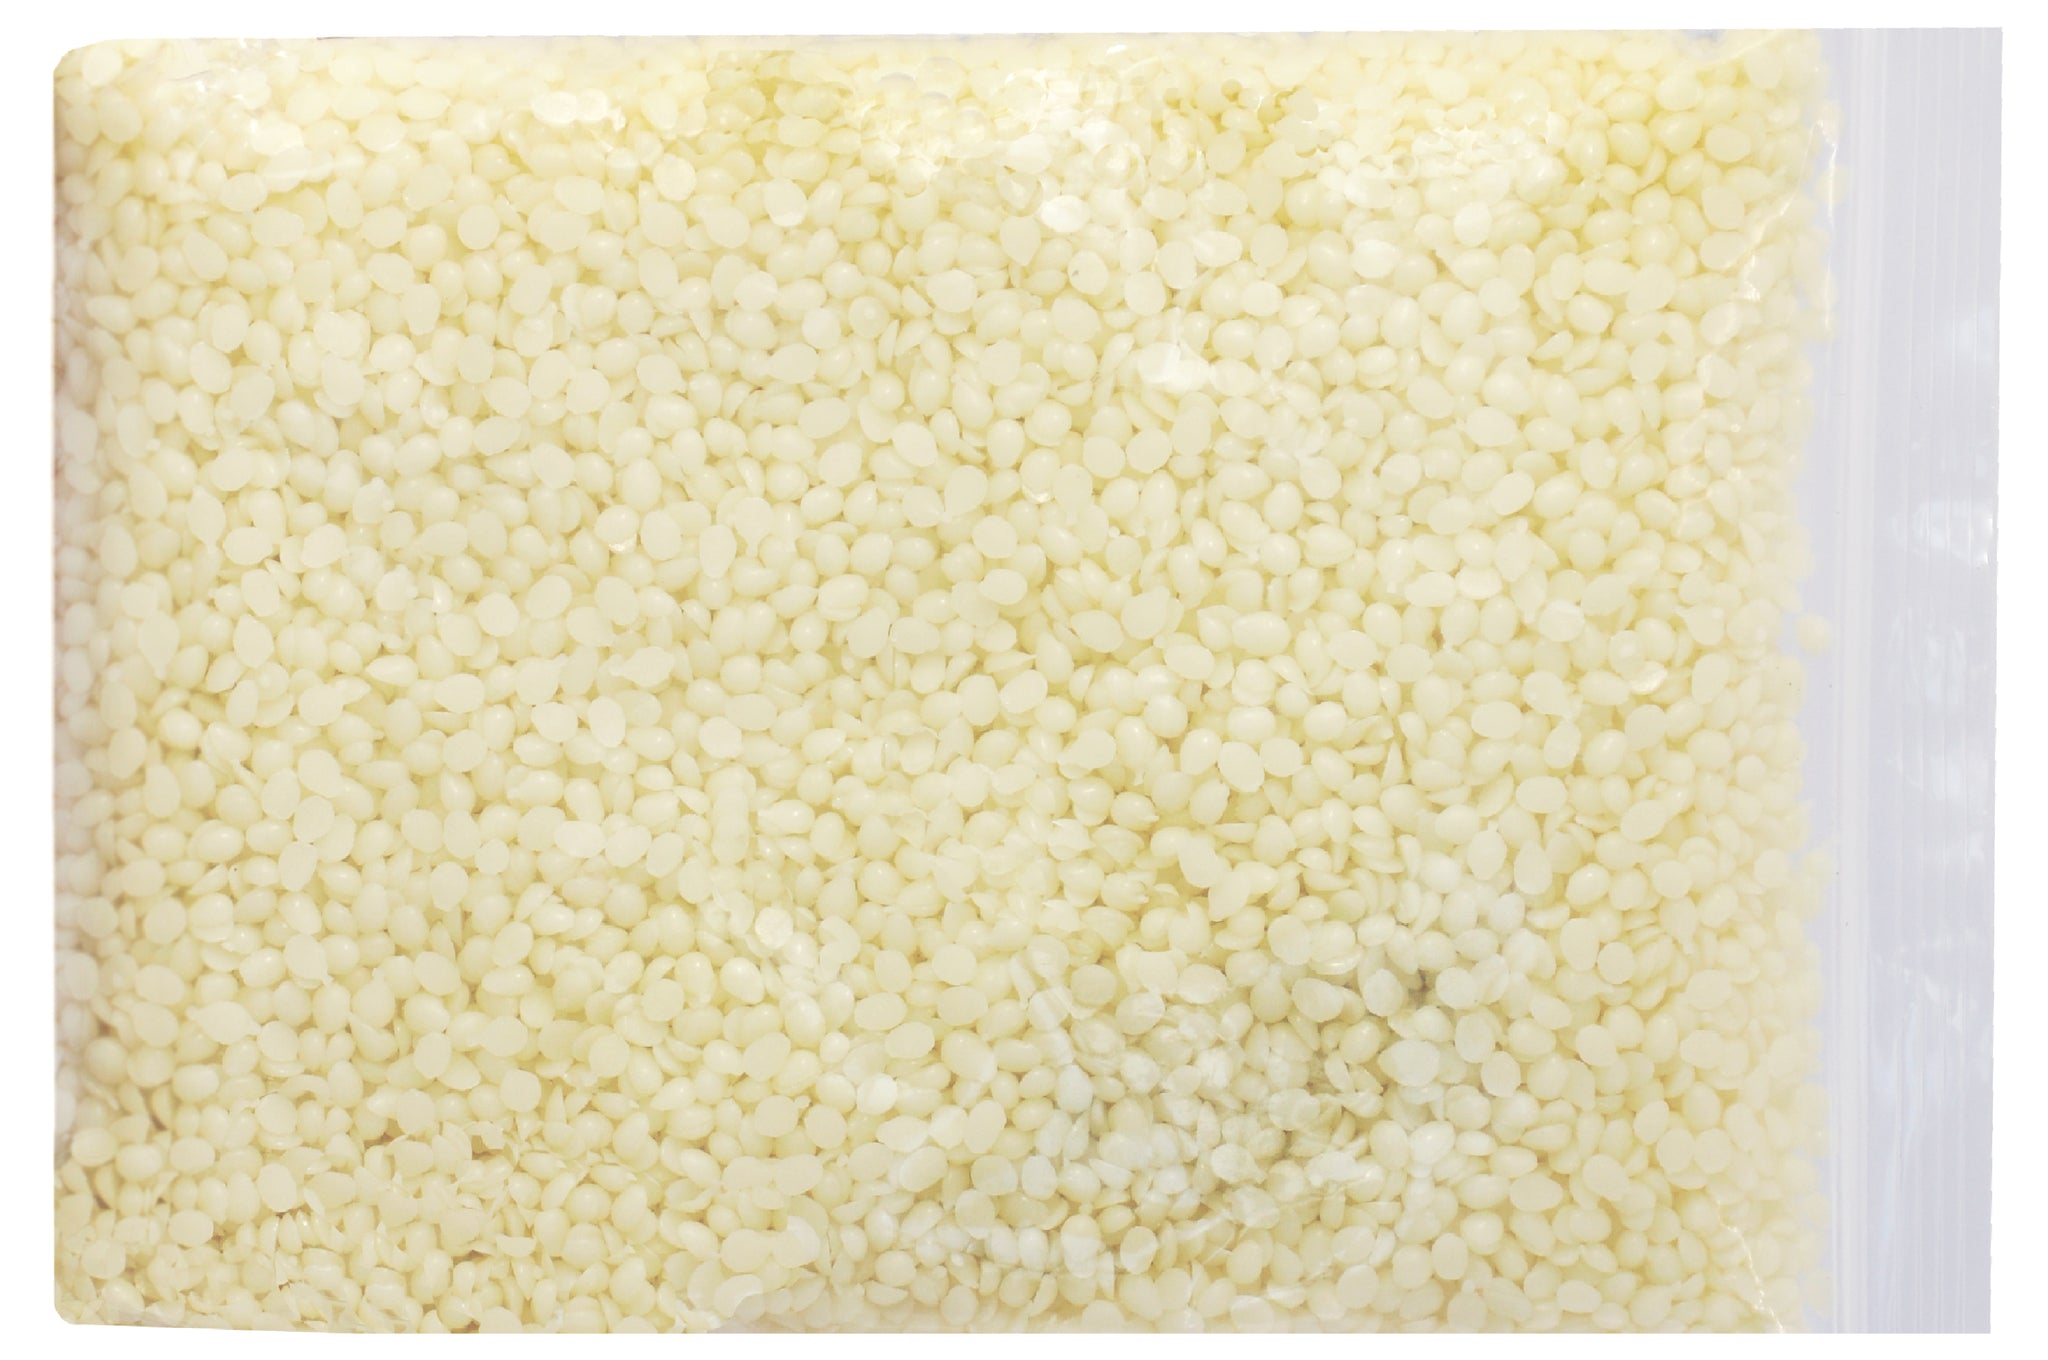 UNICY 2LB White Beeswax Pastilles, Easily Melt Bees Wax Pellets